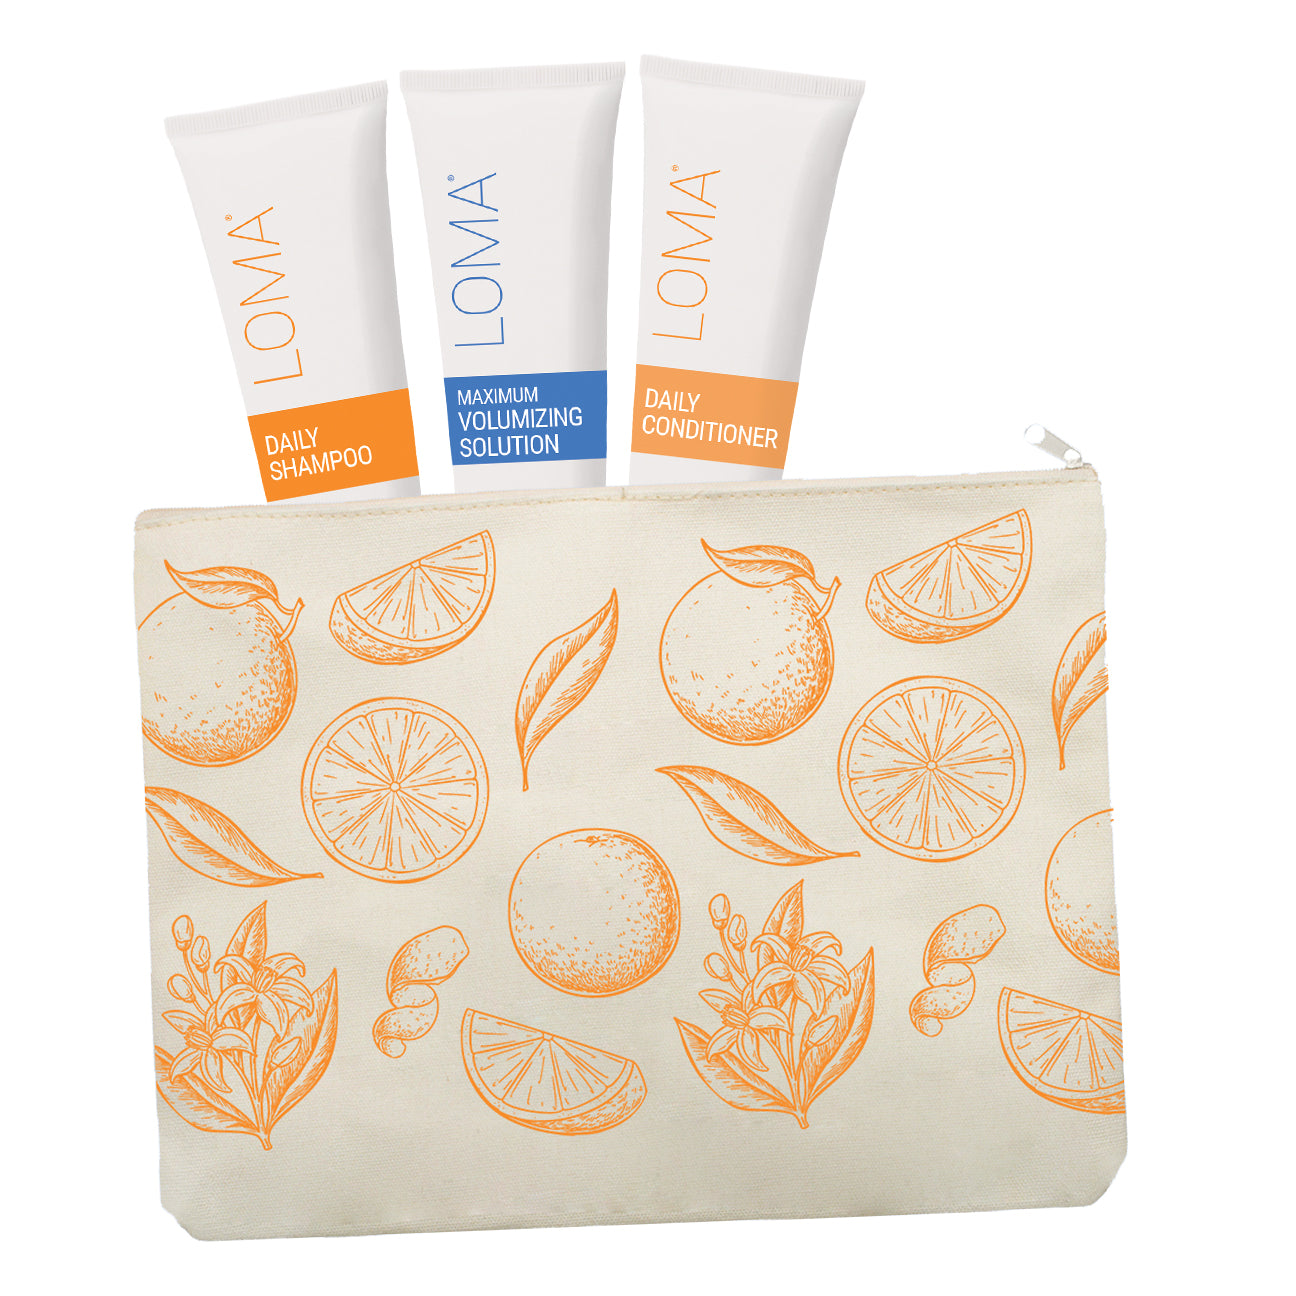 Daily Trio Travel Kit - Loma Hair and Body Care